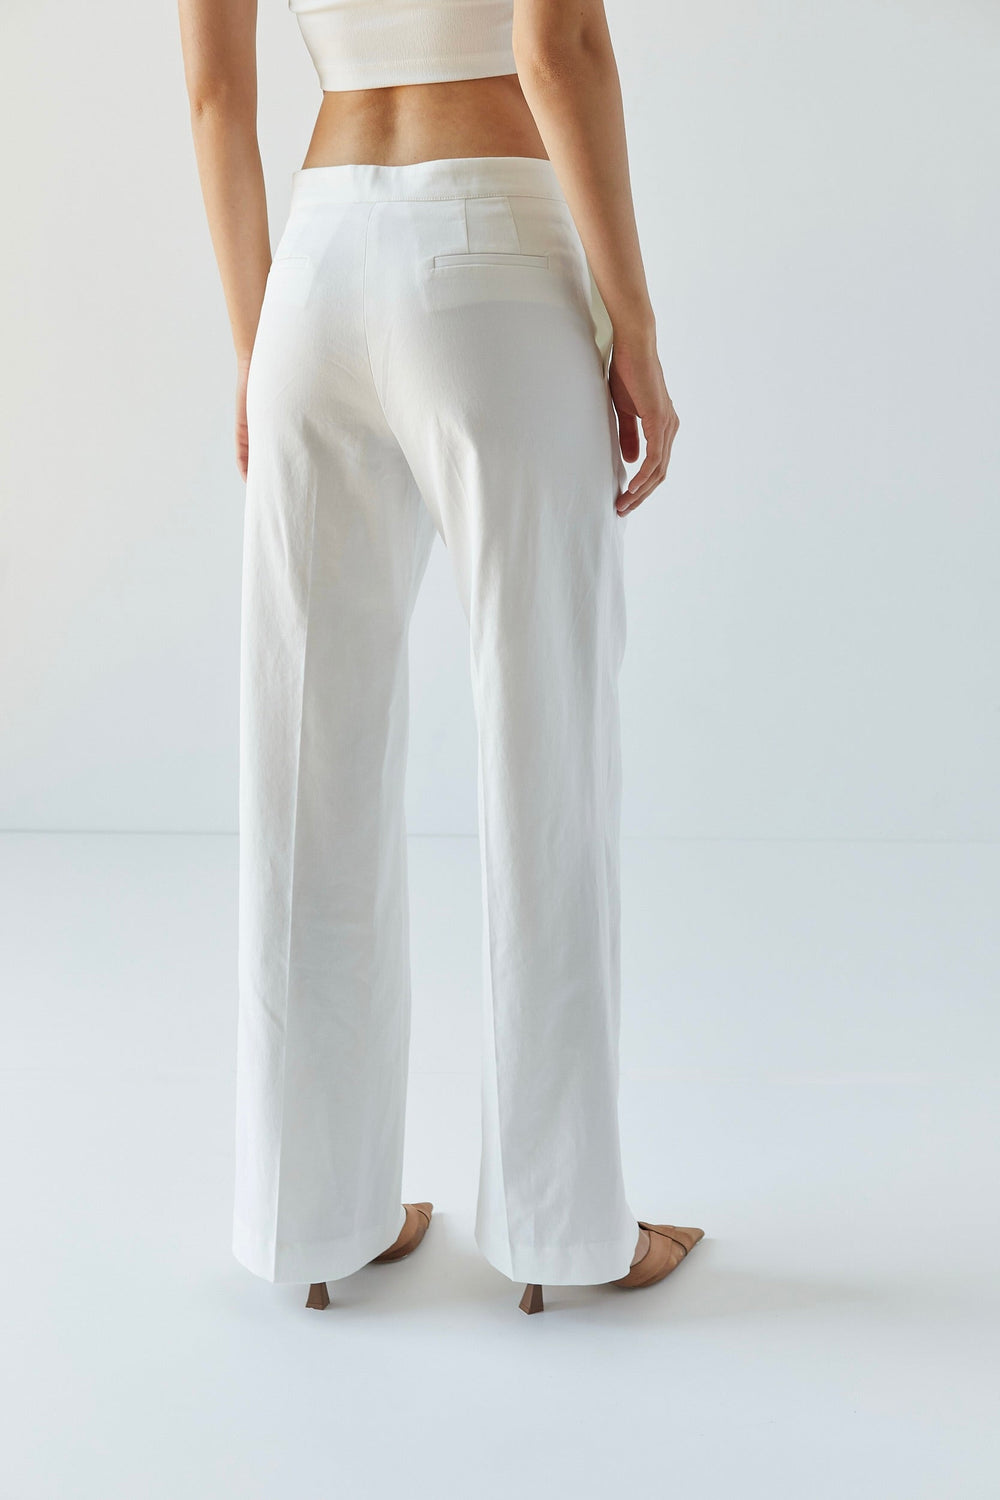 Adroit Atelier Preston Straight-Leg Stretch Trousers with Pin Tuck